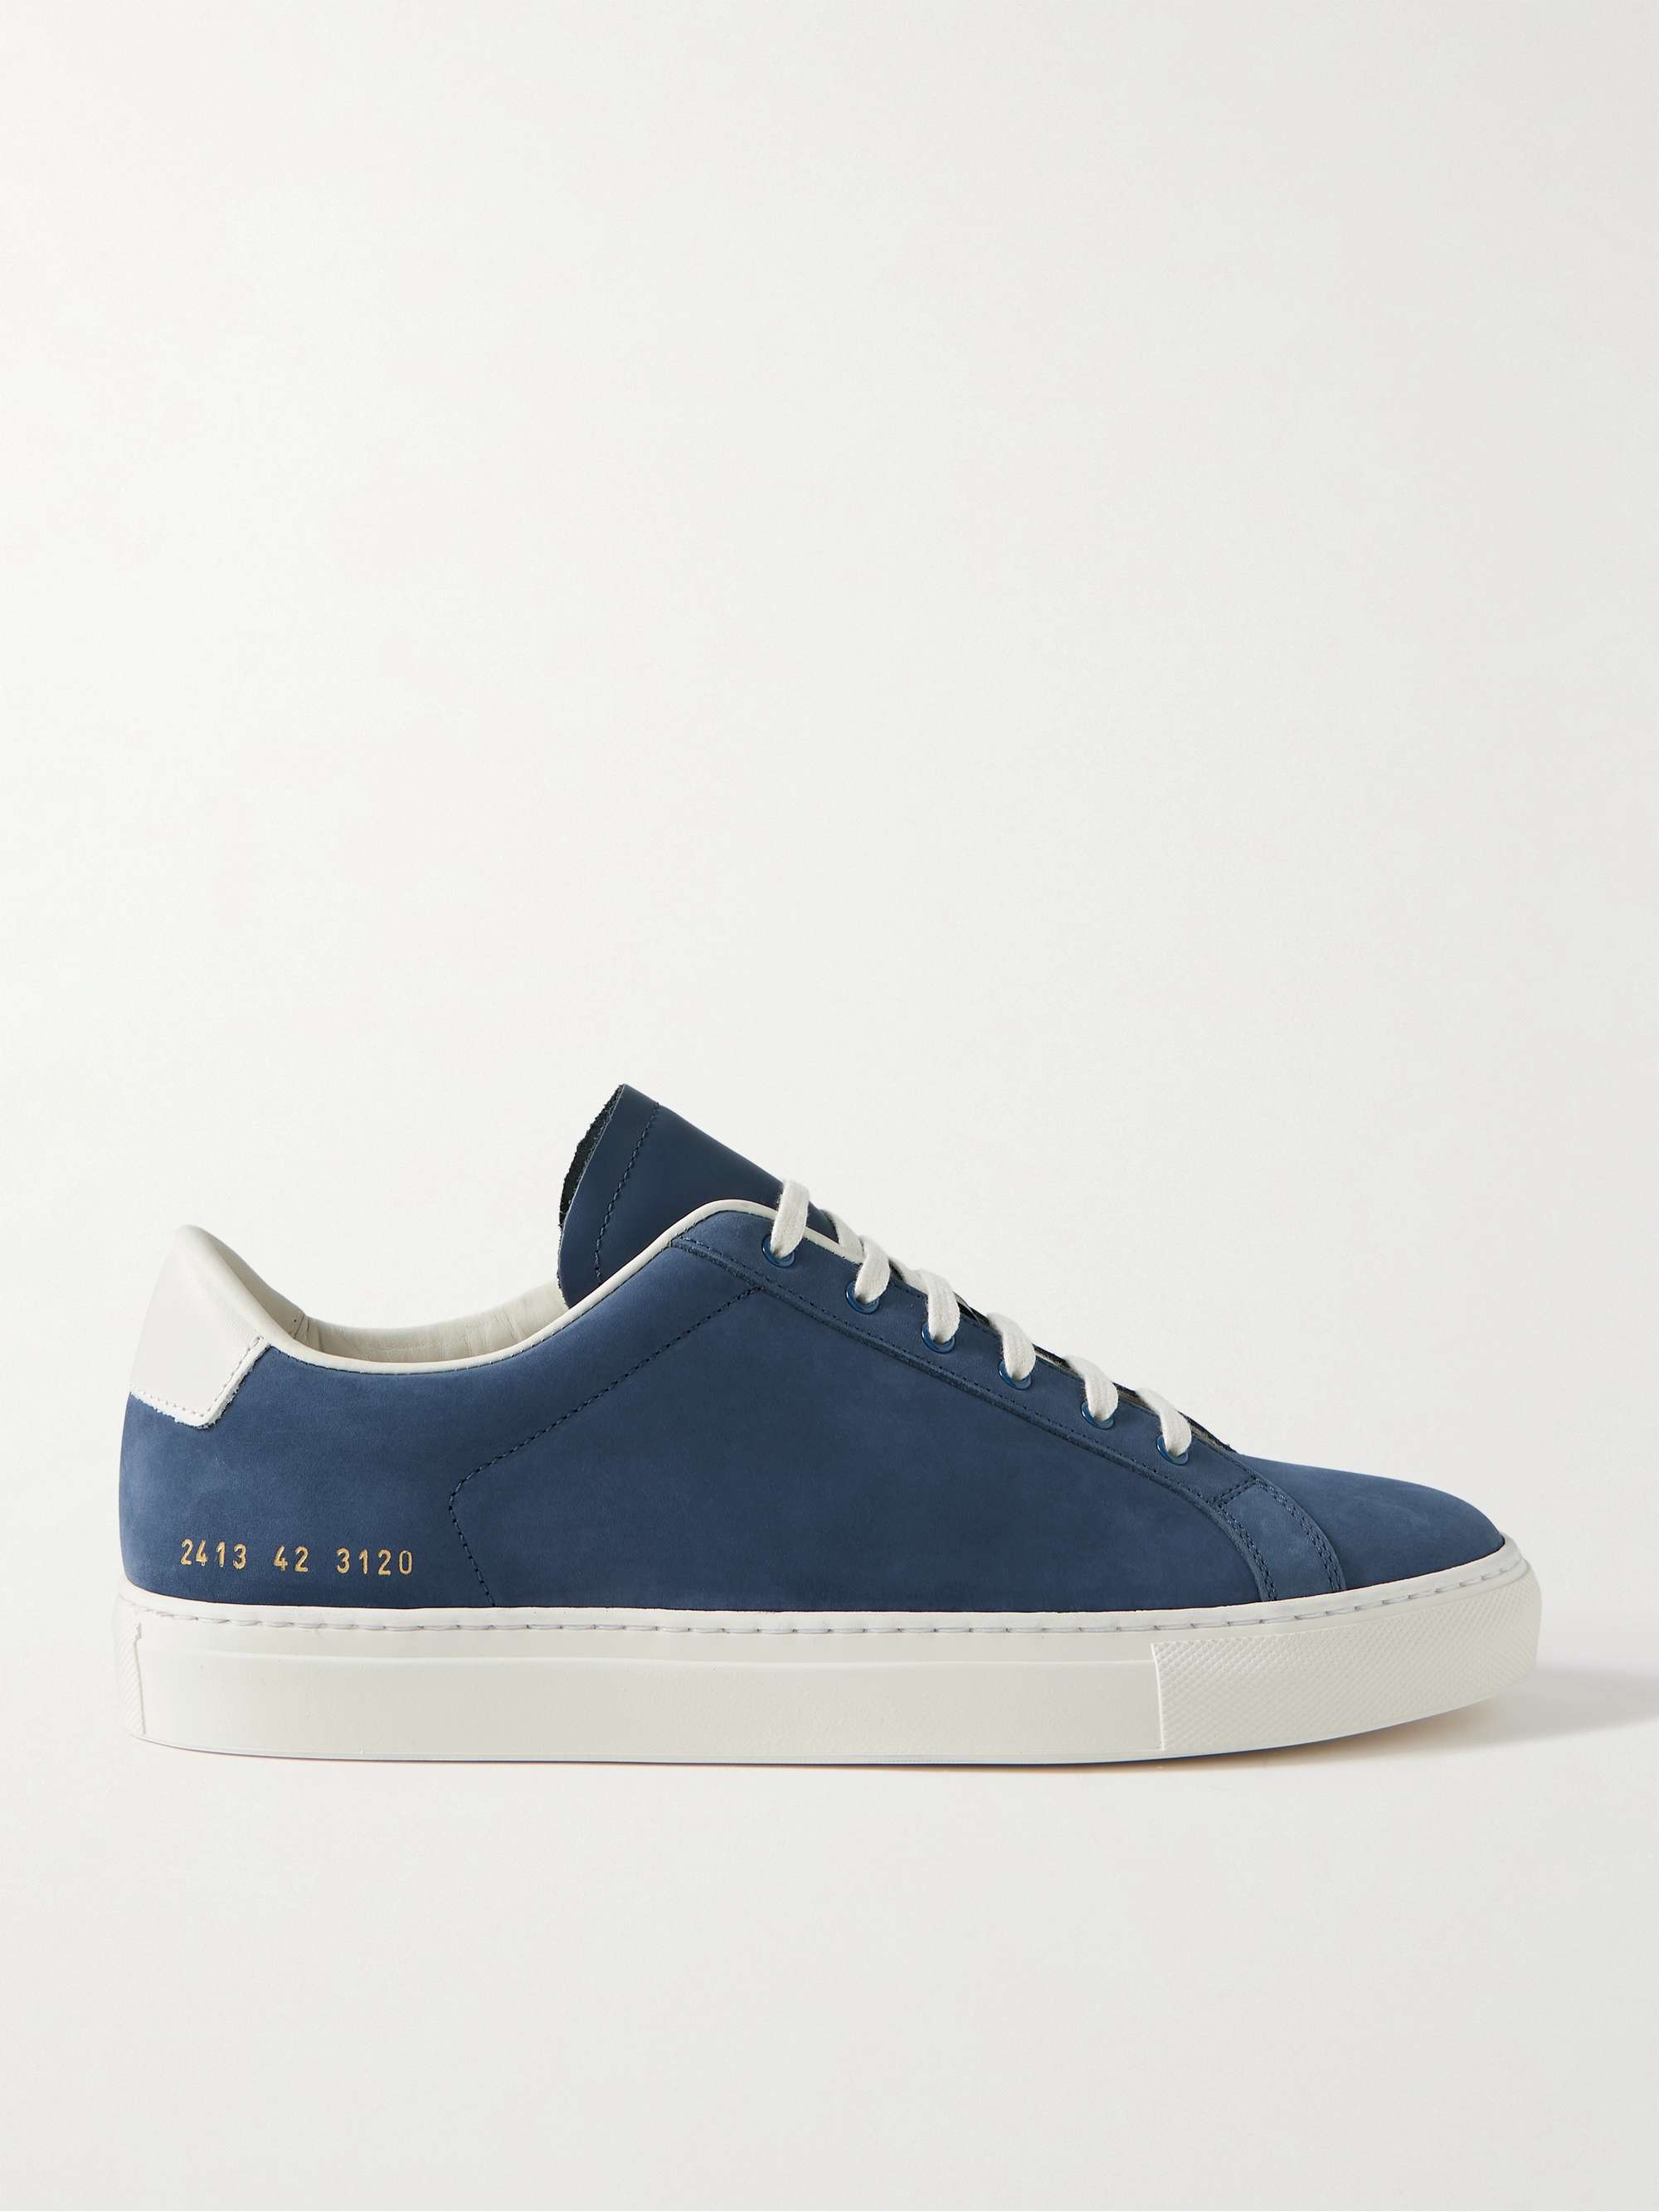 COMMON PROJECTS Retro Leather-Trimmed Nubuck Sneakers for Men | MR PORTER